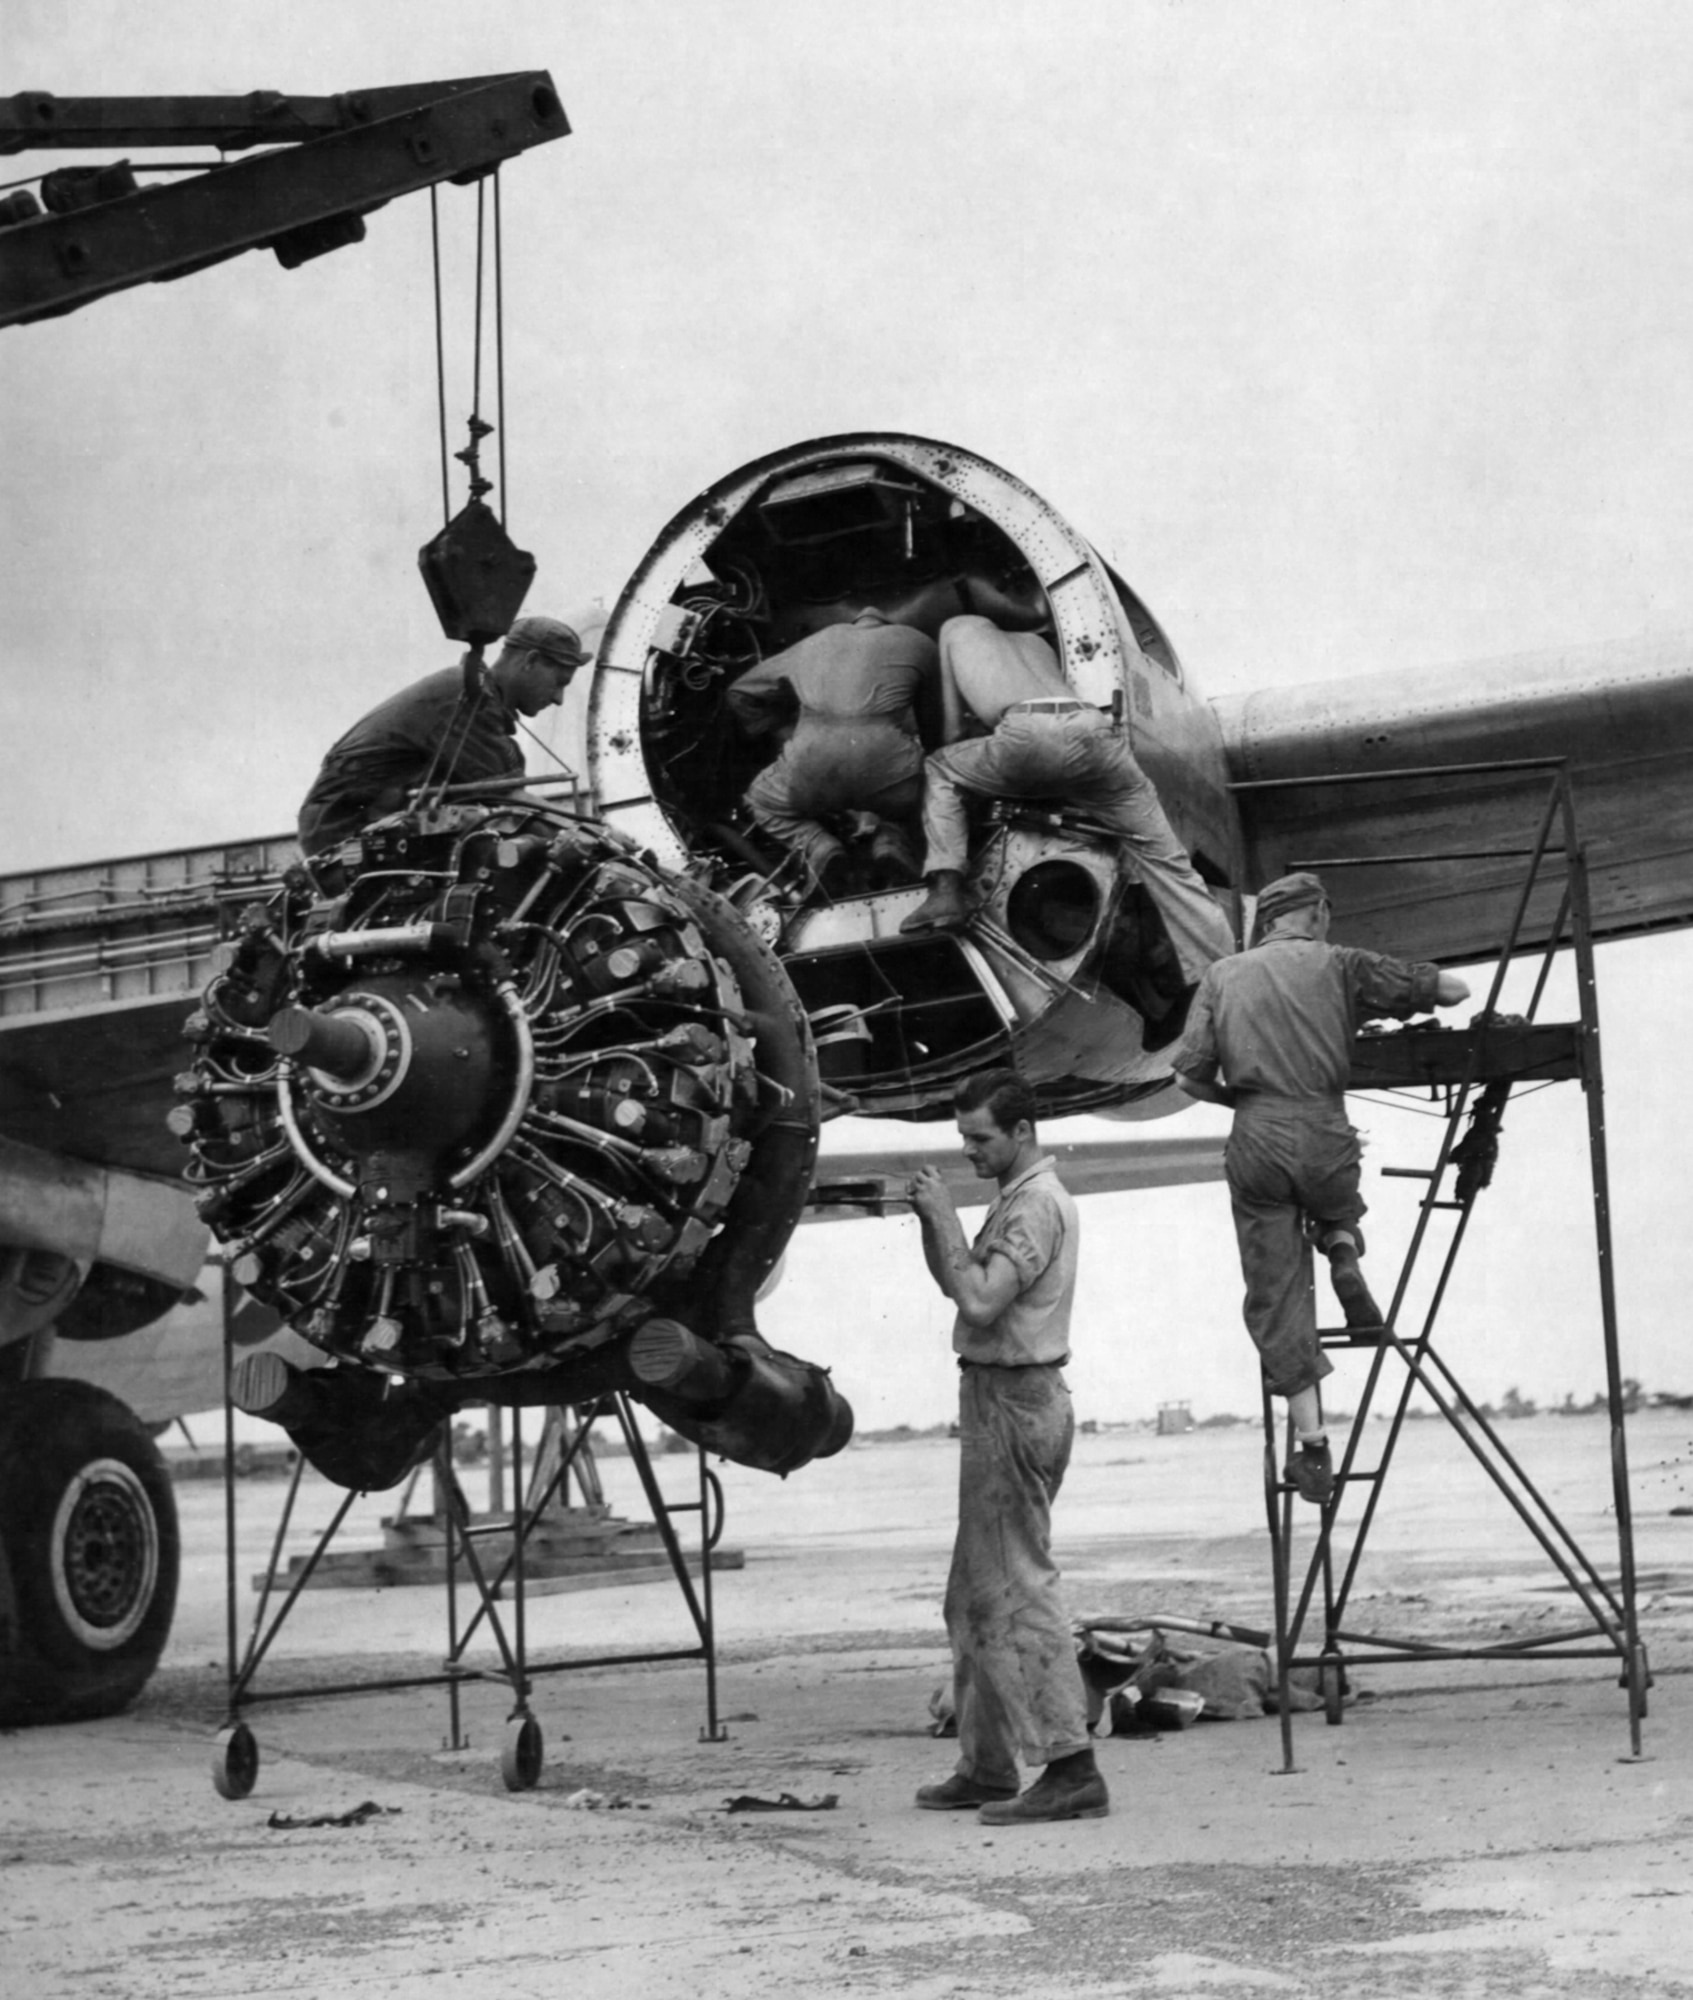 Maintenance personnel in India removing a damaged engine from a B-29.  They took off any undamaged parts and reused them on the replacement engine. (U.S. Air Force photo).